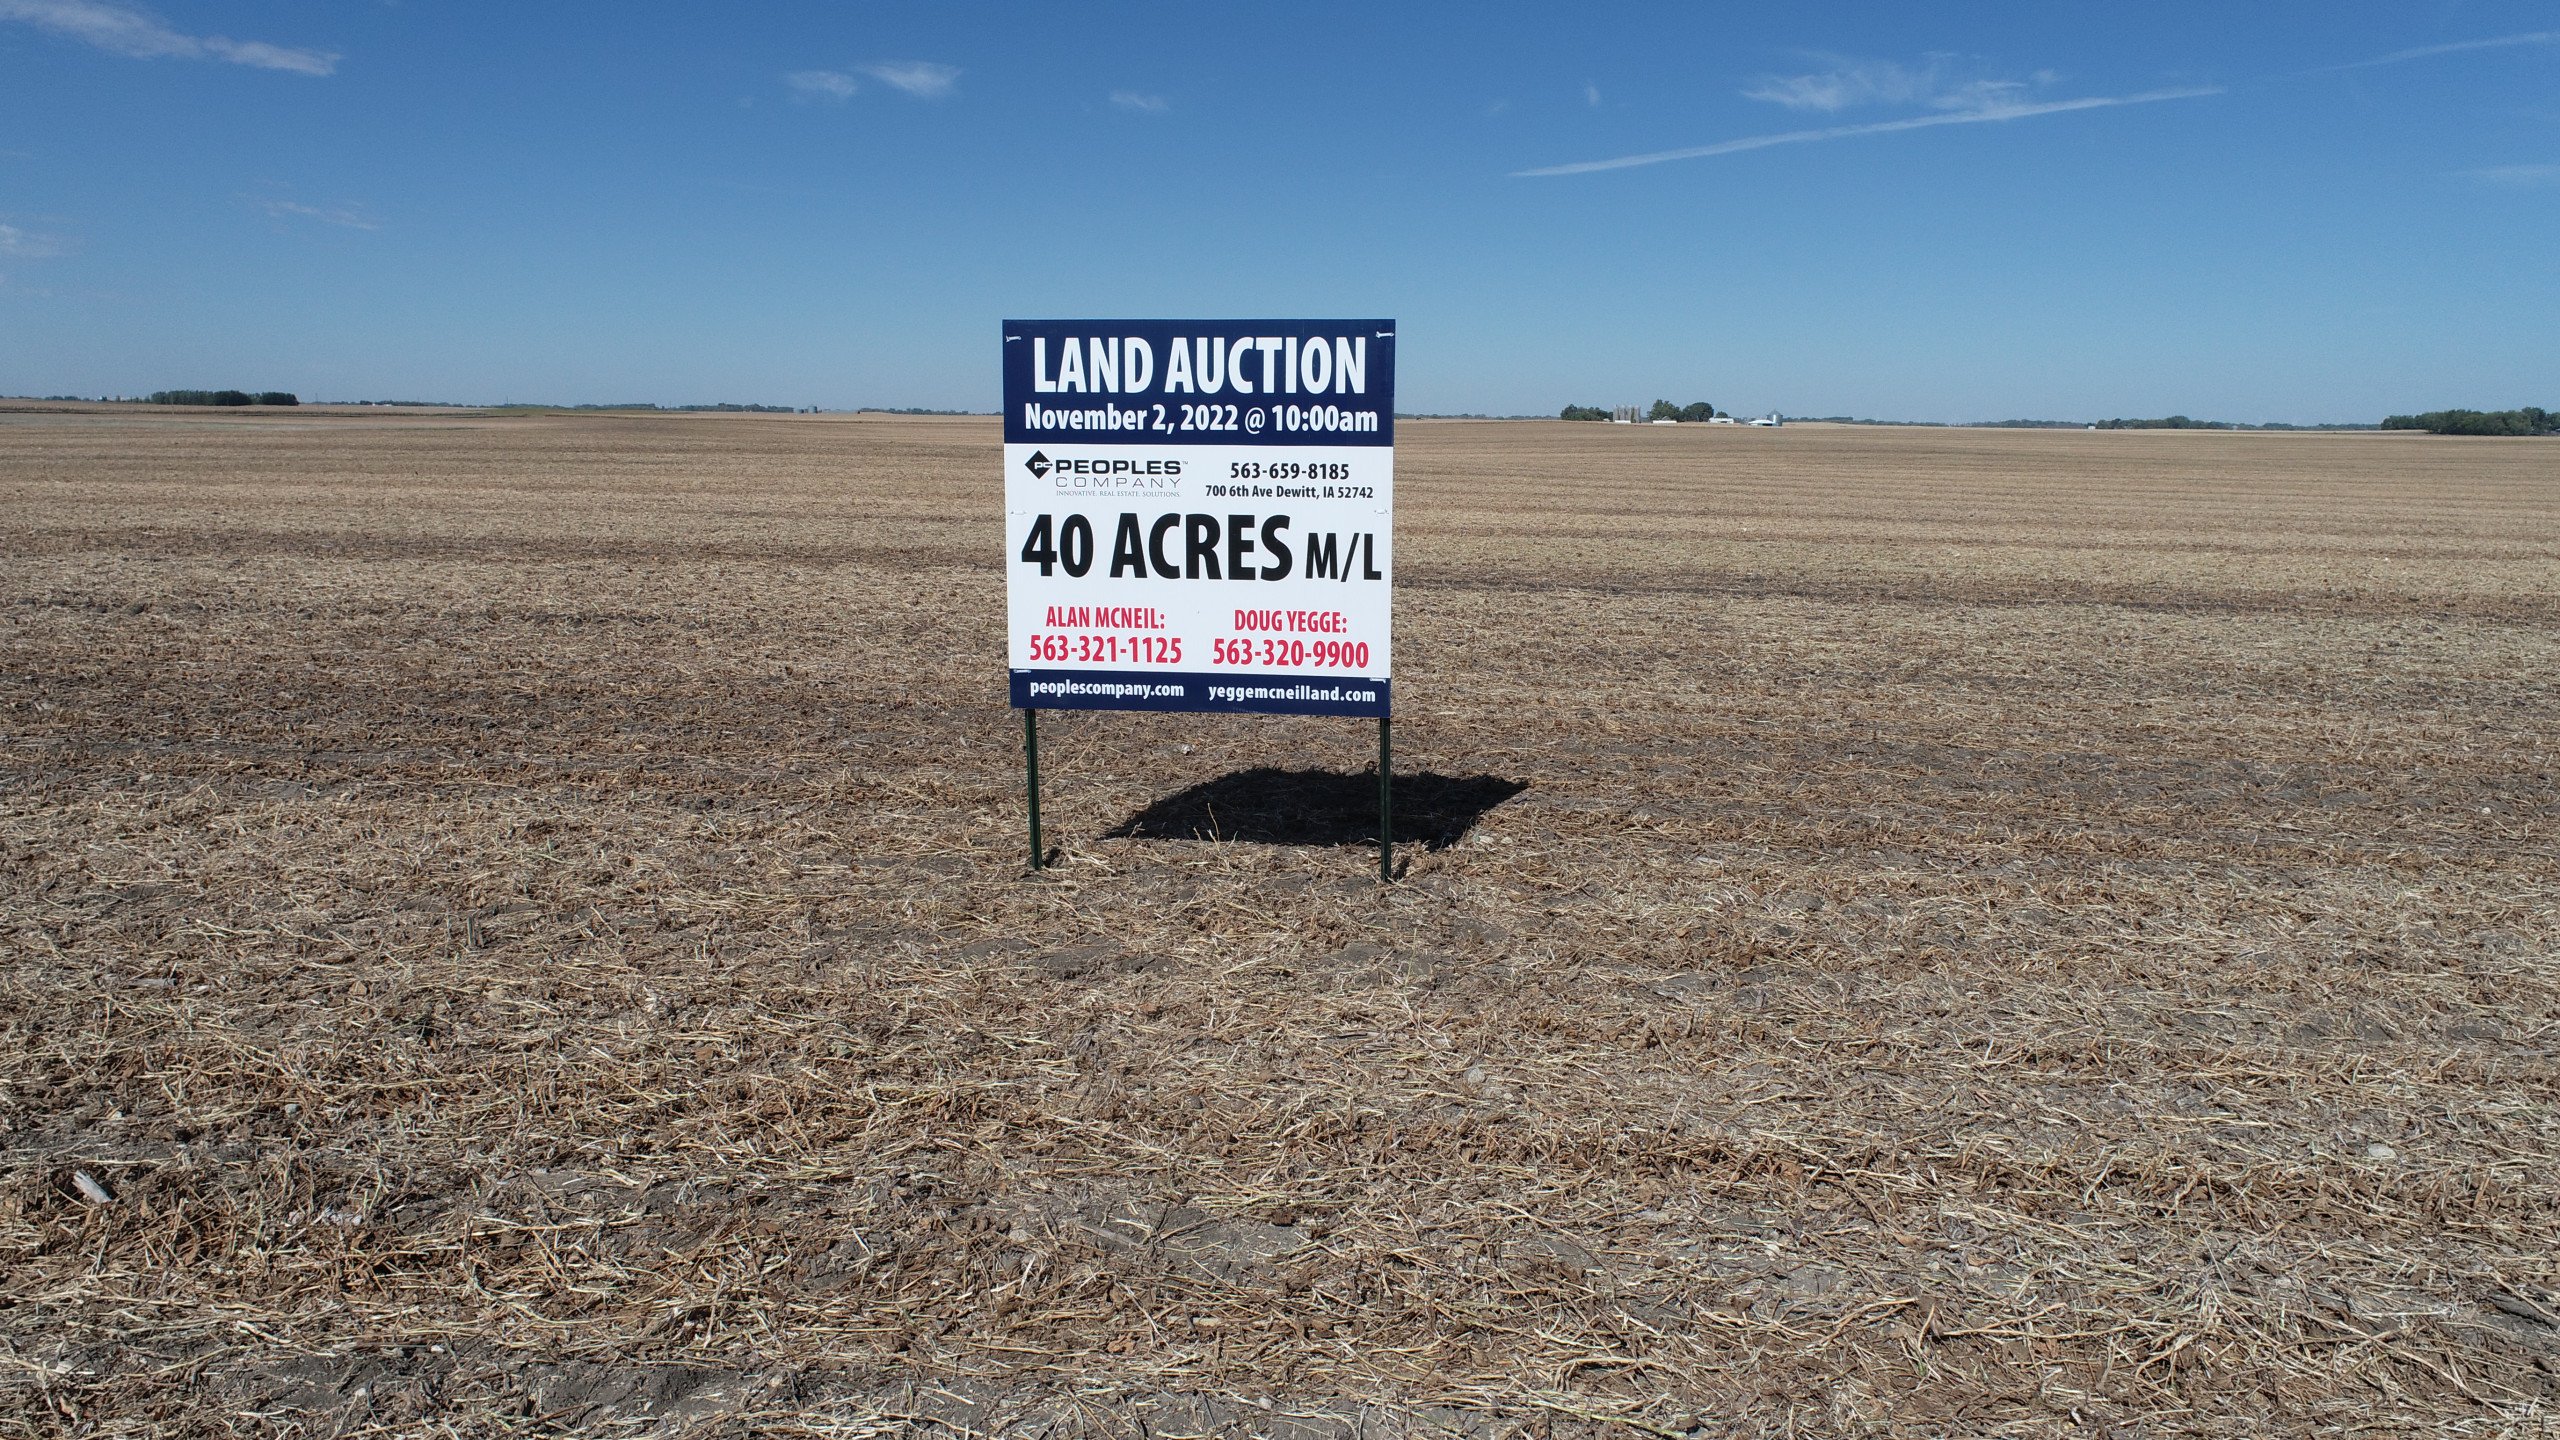 auctions-land-palo-alto-county-iowa-40-acres-listing-number-16454-DJI_0491-1.jpg